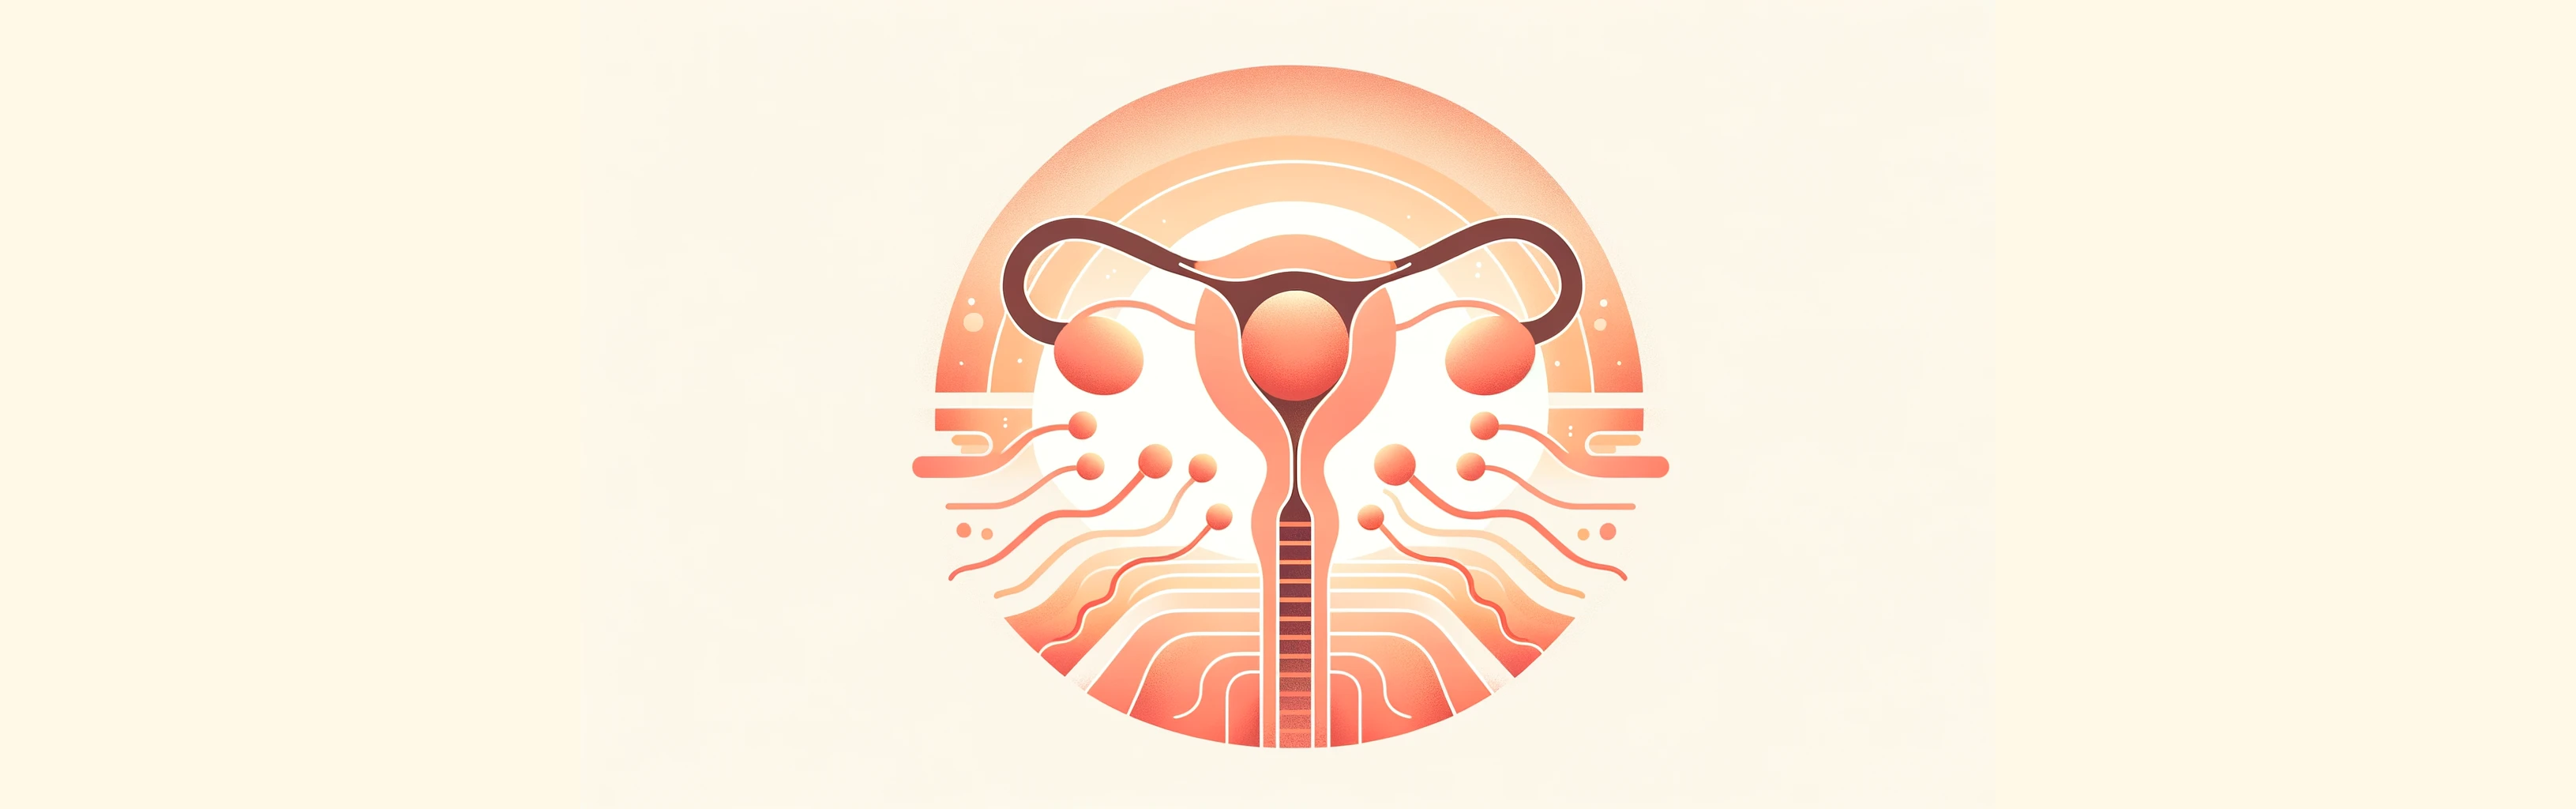 Graphic of Follicle Tracking Scan. An illustration of an egg in the uterus with sperm coming towards it.